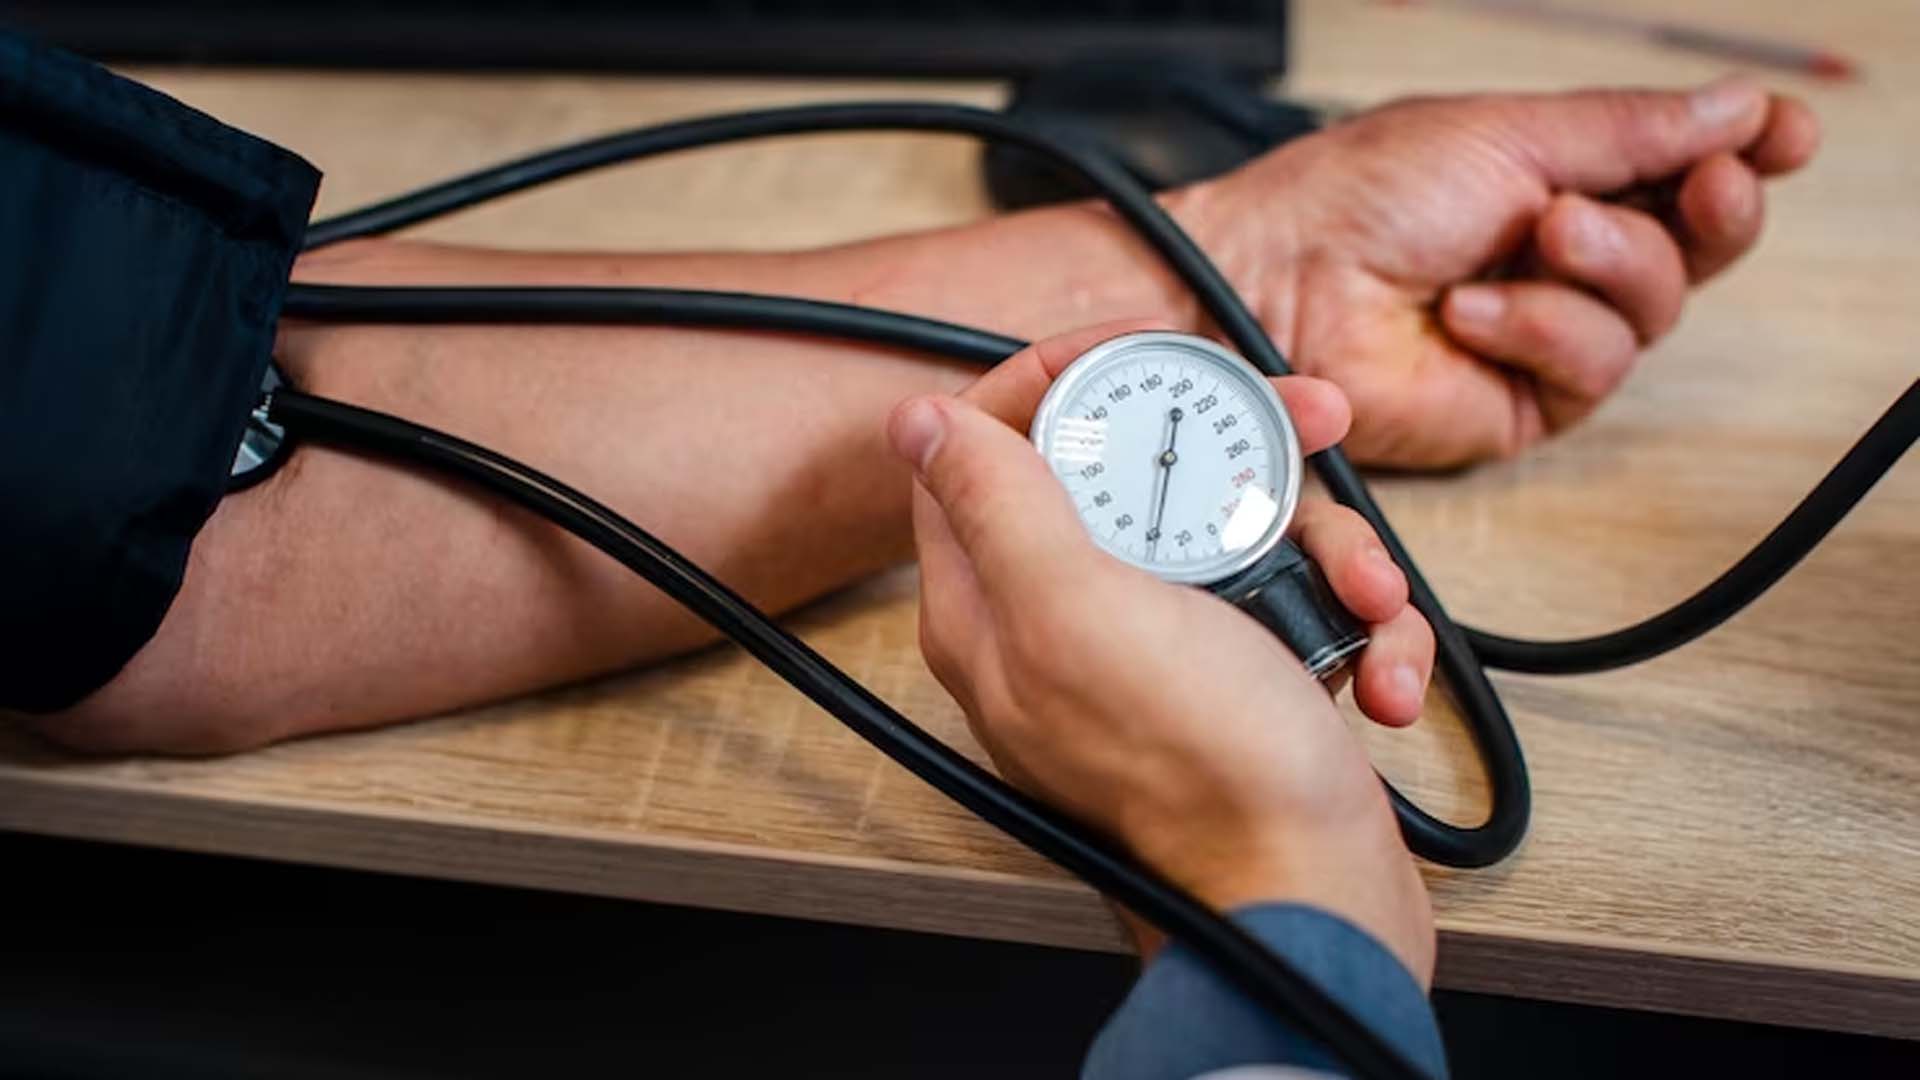 Low Blood Pressure or hypotension